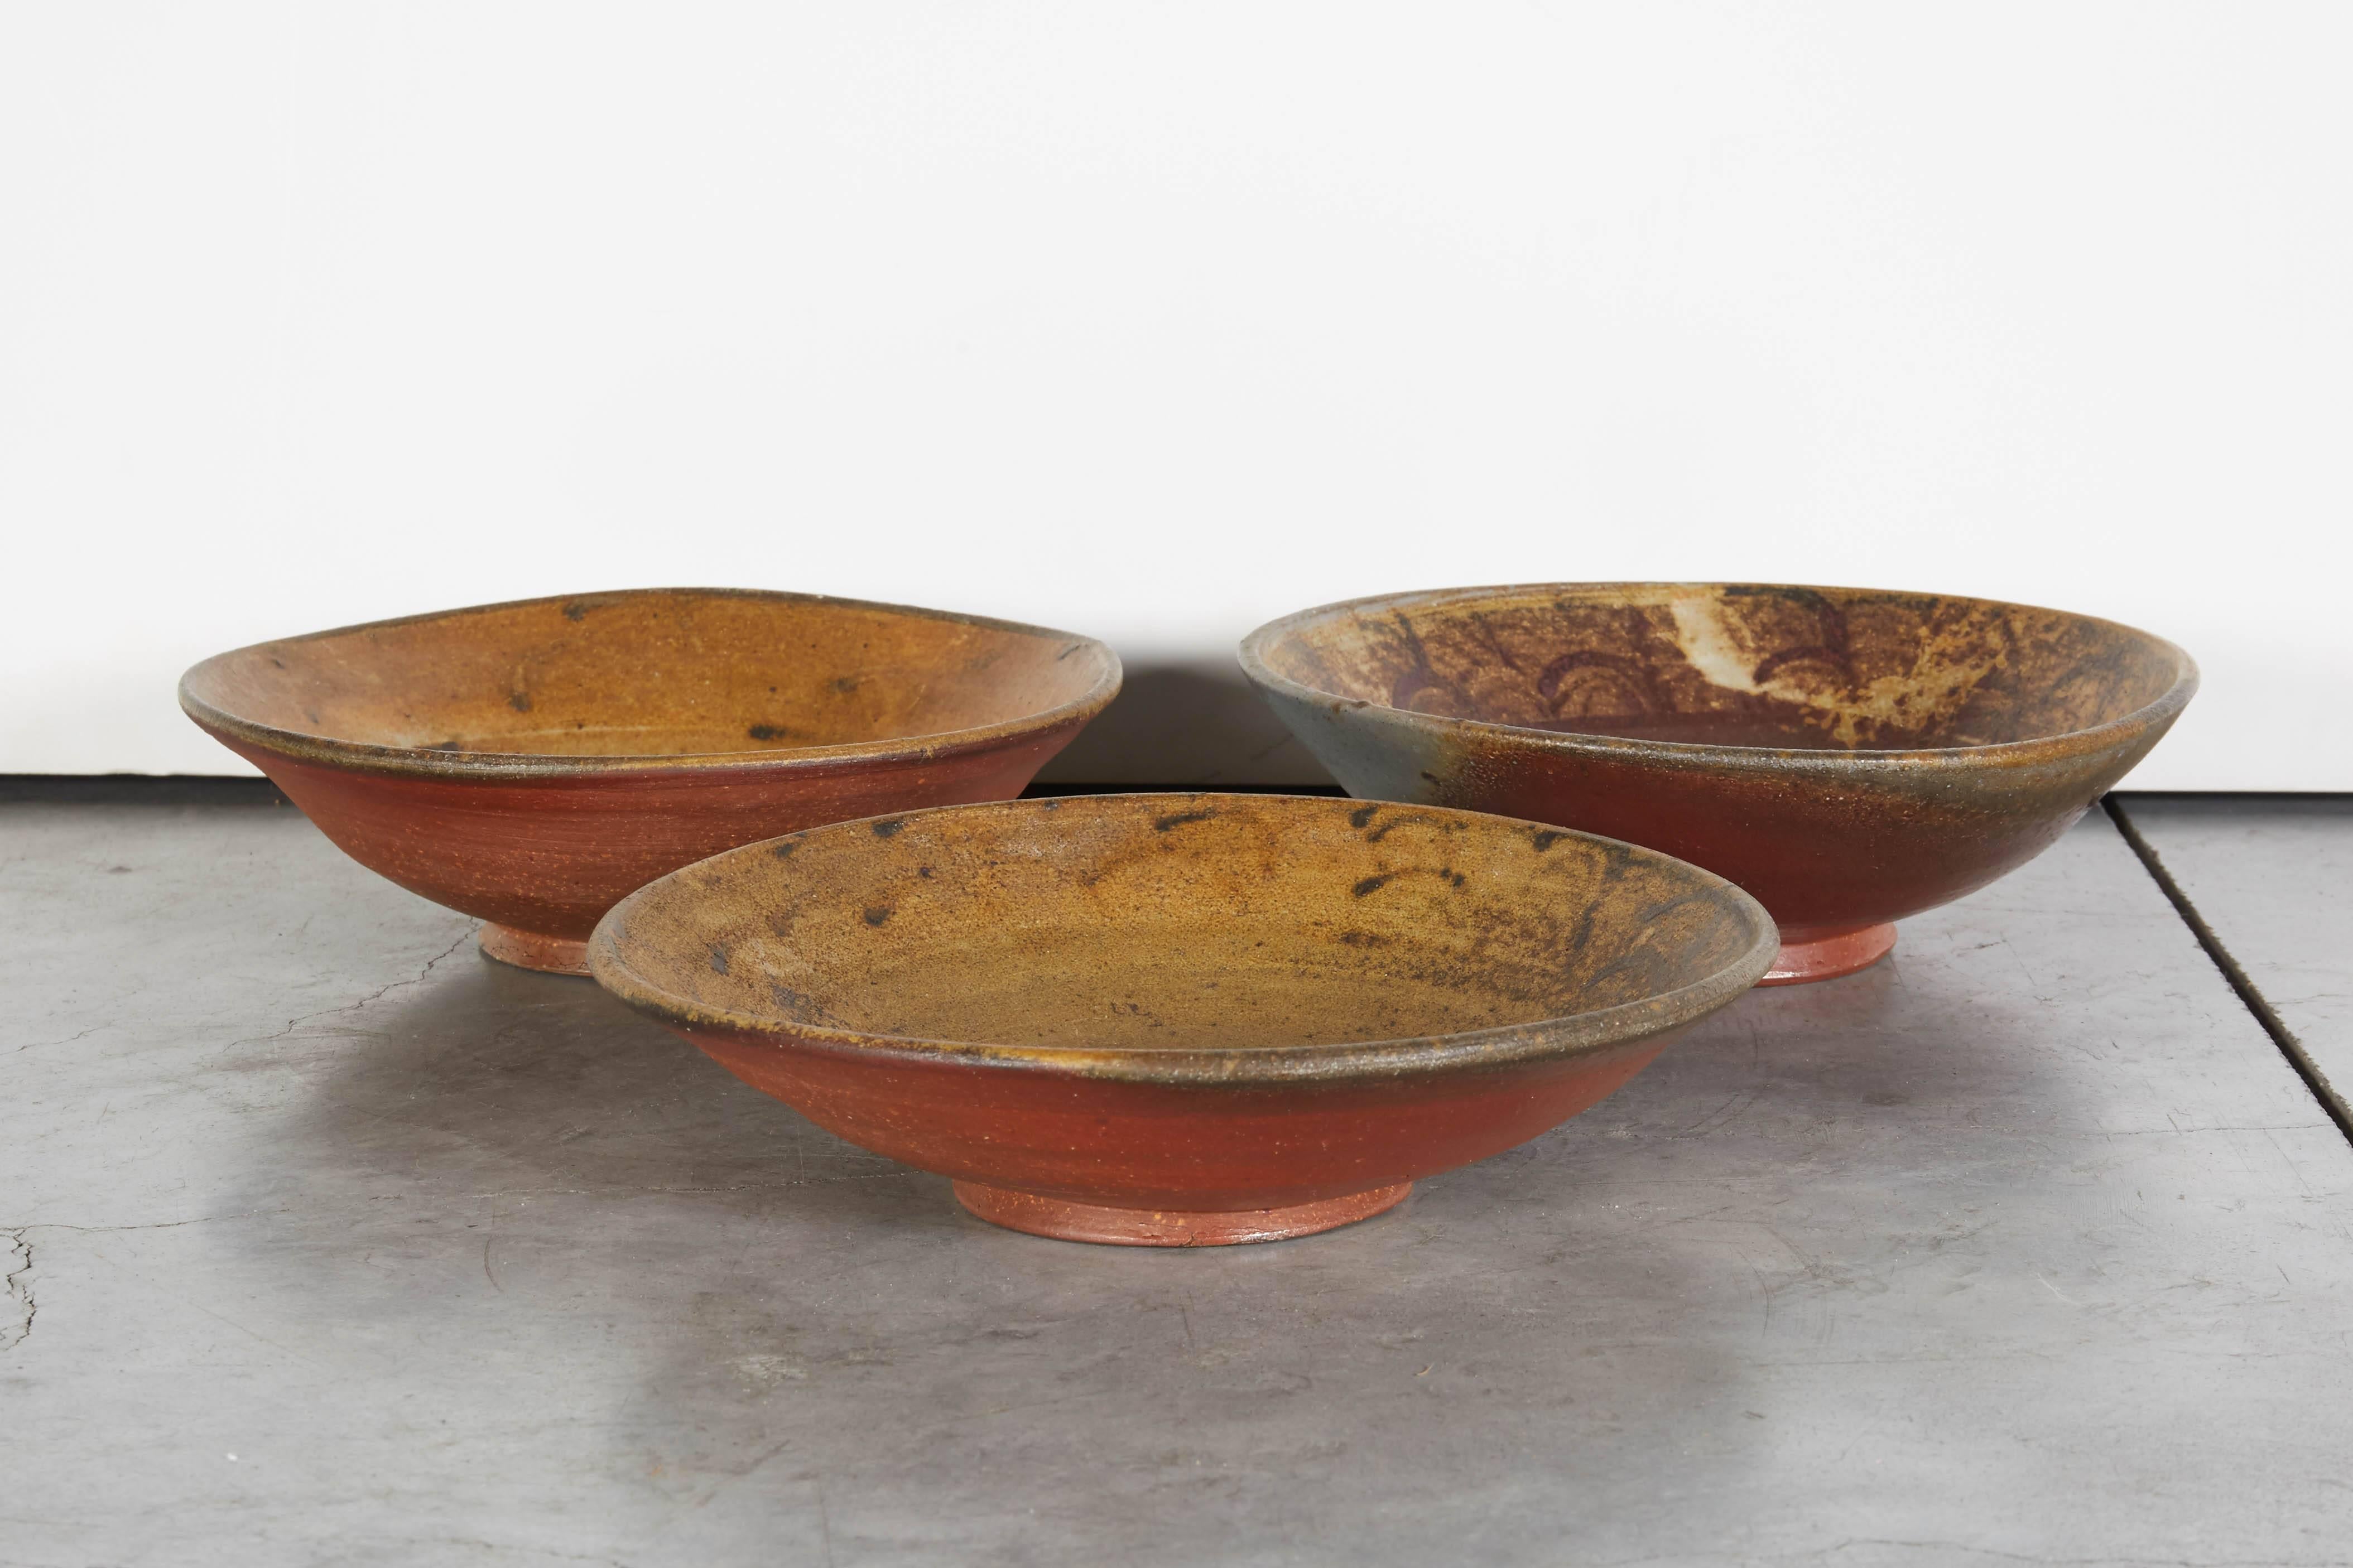 Three 20th century handmade Japanese Bizen ware bowls. These pieces were slow fired for 10 days or more in the traditional kilns of the Bizen province of Japan and show the characteristic traces of molten ash on the red clay bodies. Each piece is